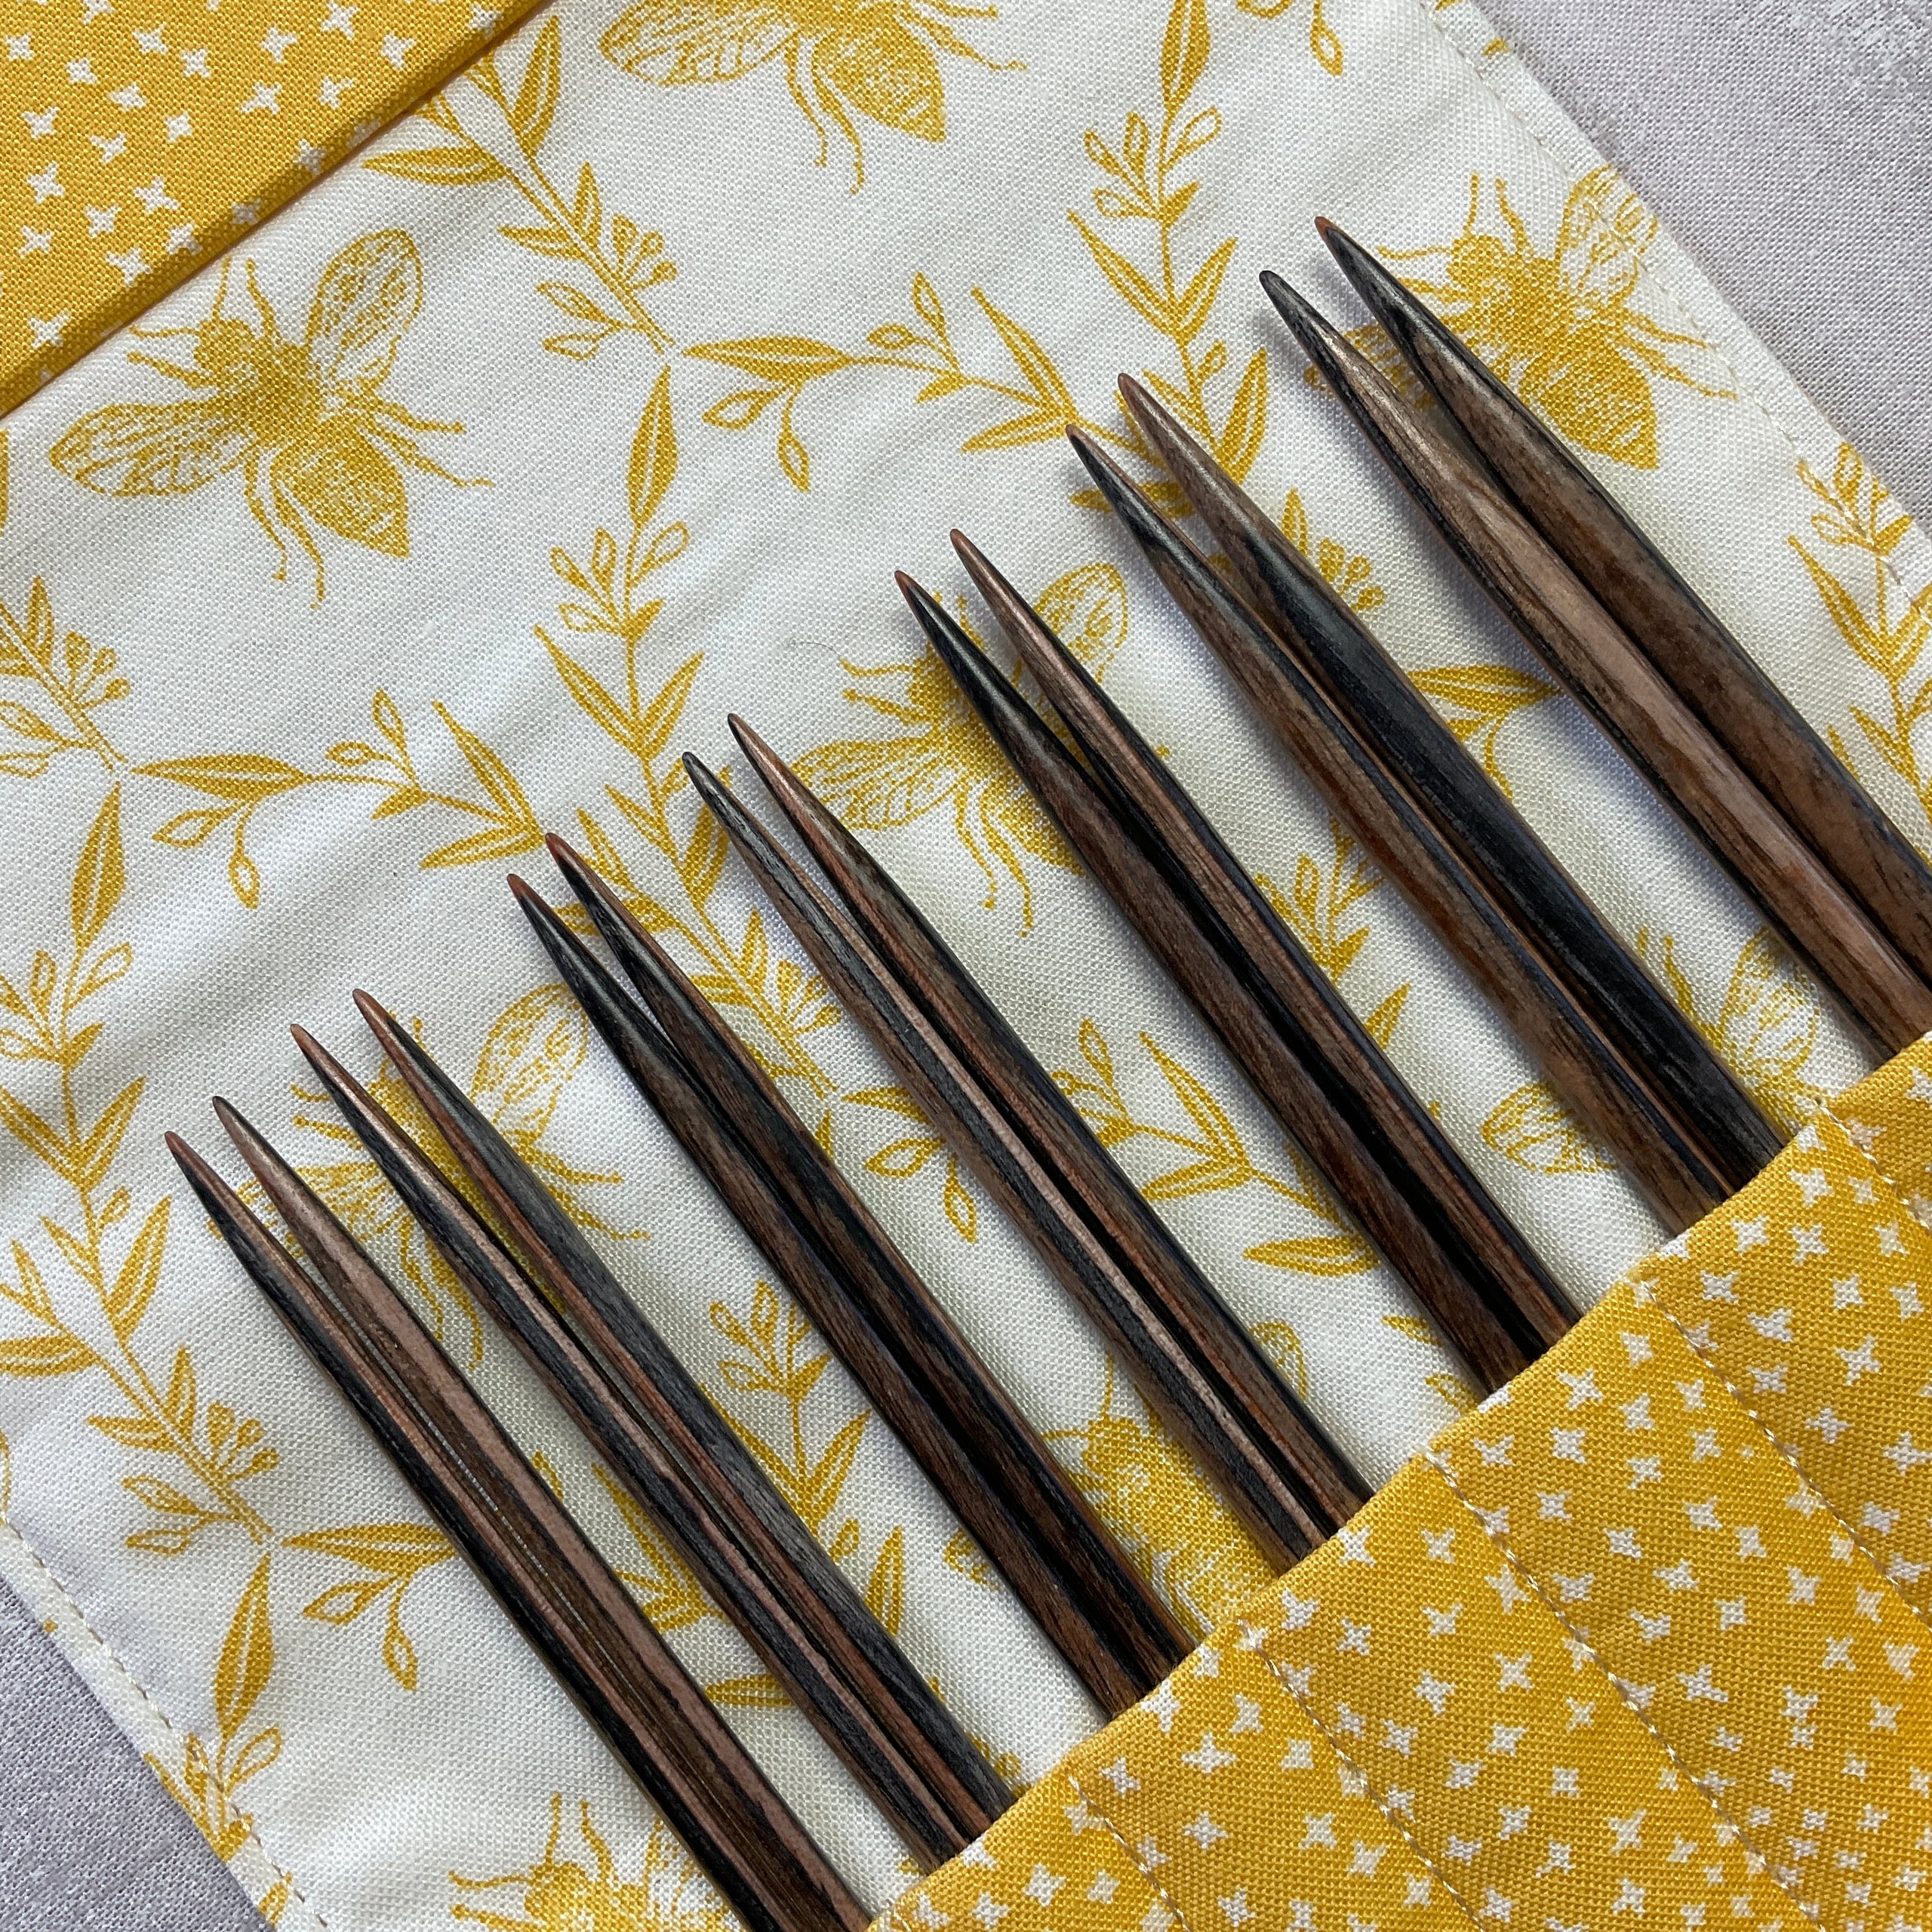 5 inch Darn Pretty™ Interchangeable Knitting Needles, LACE (Pair)